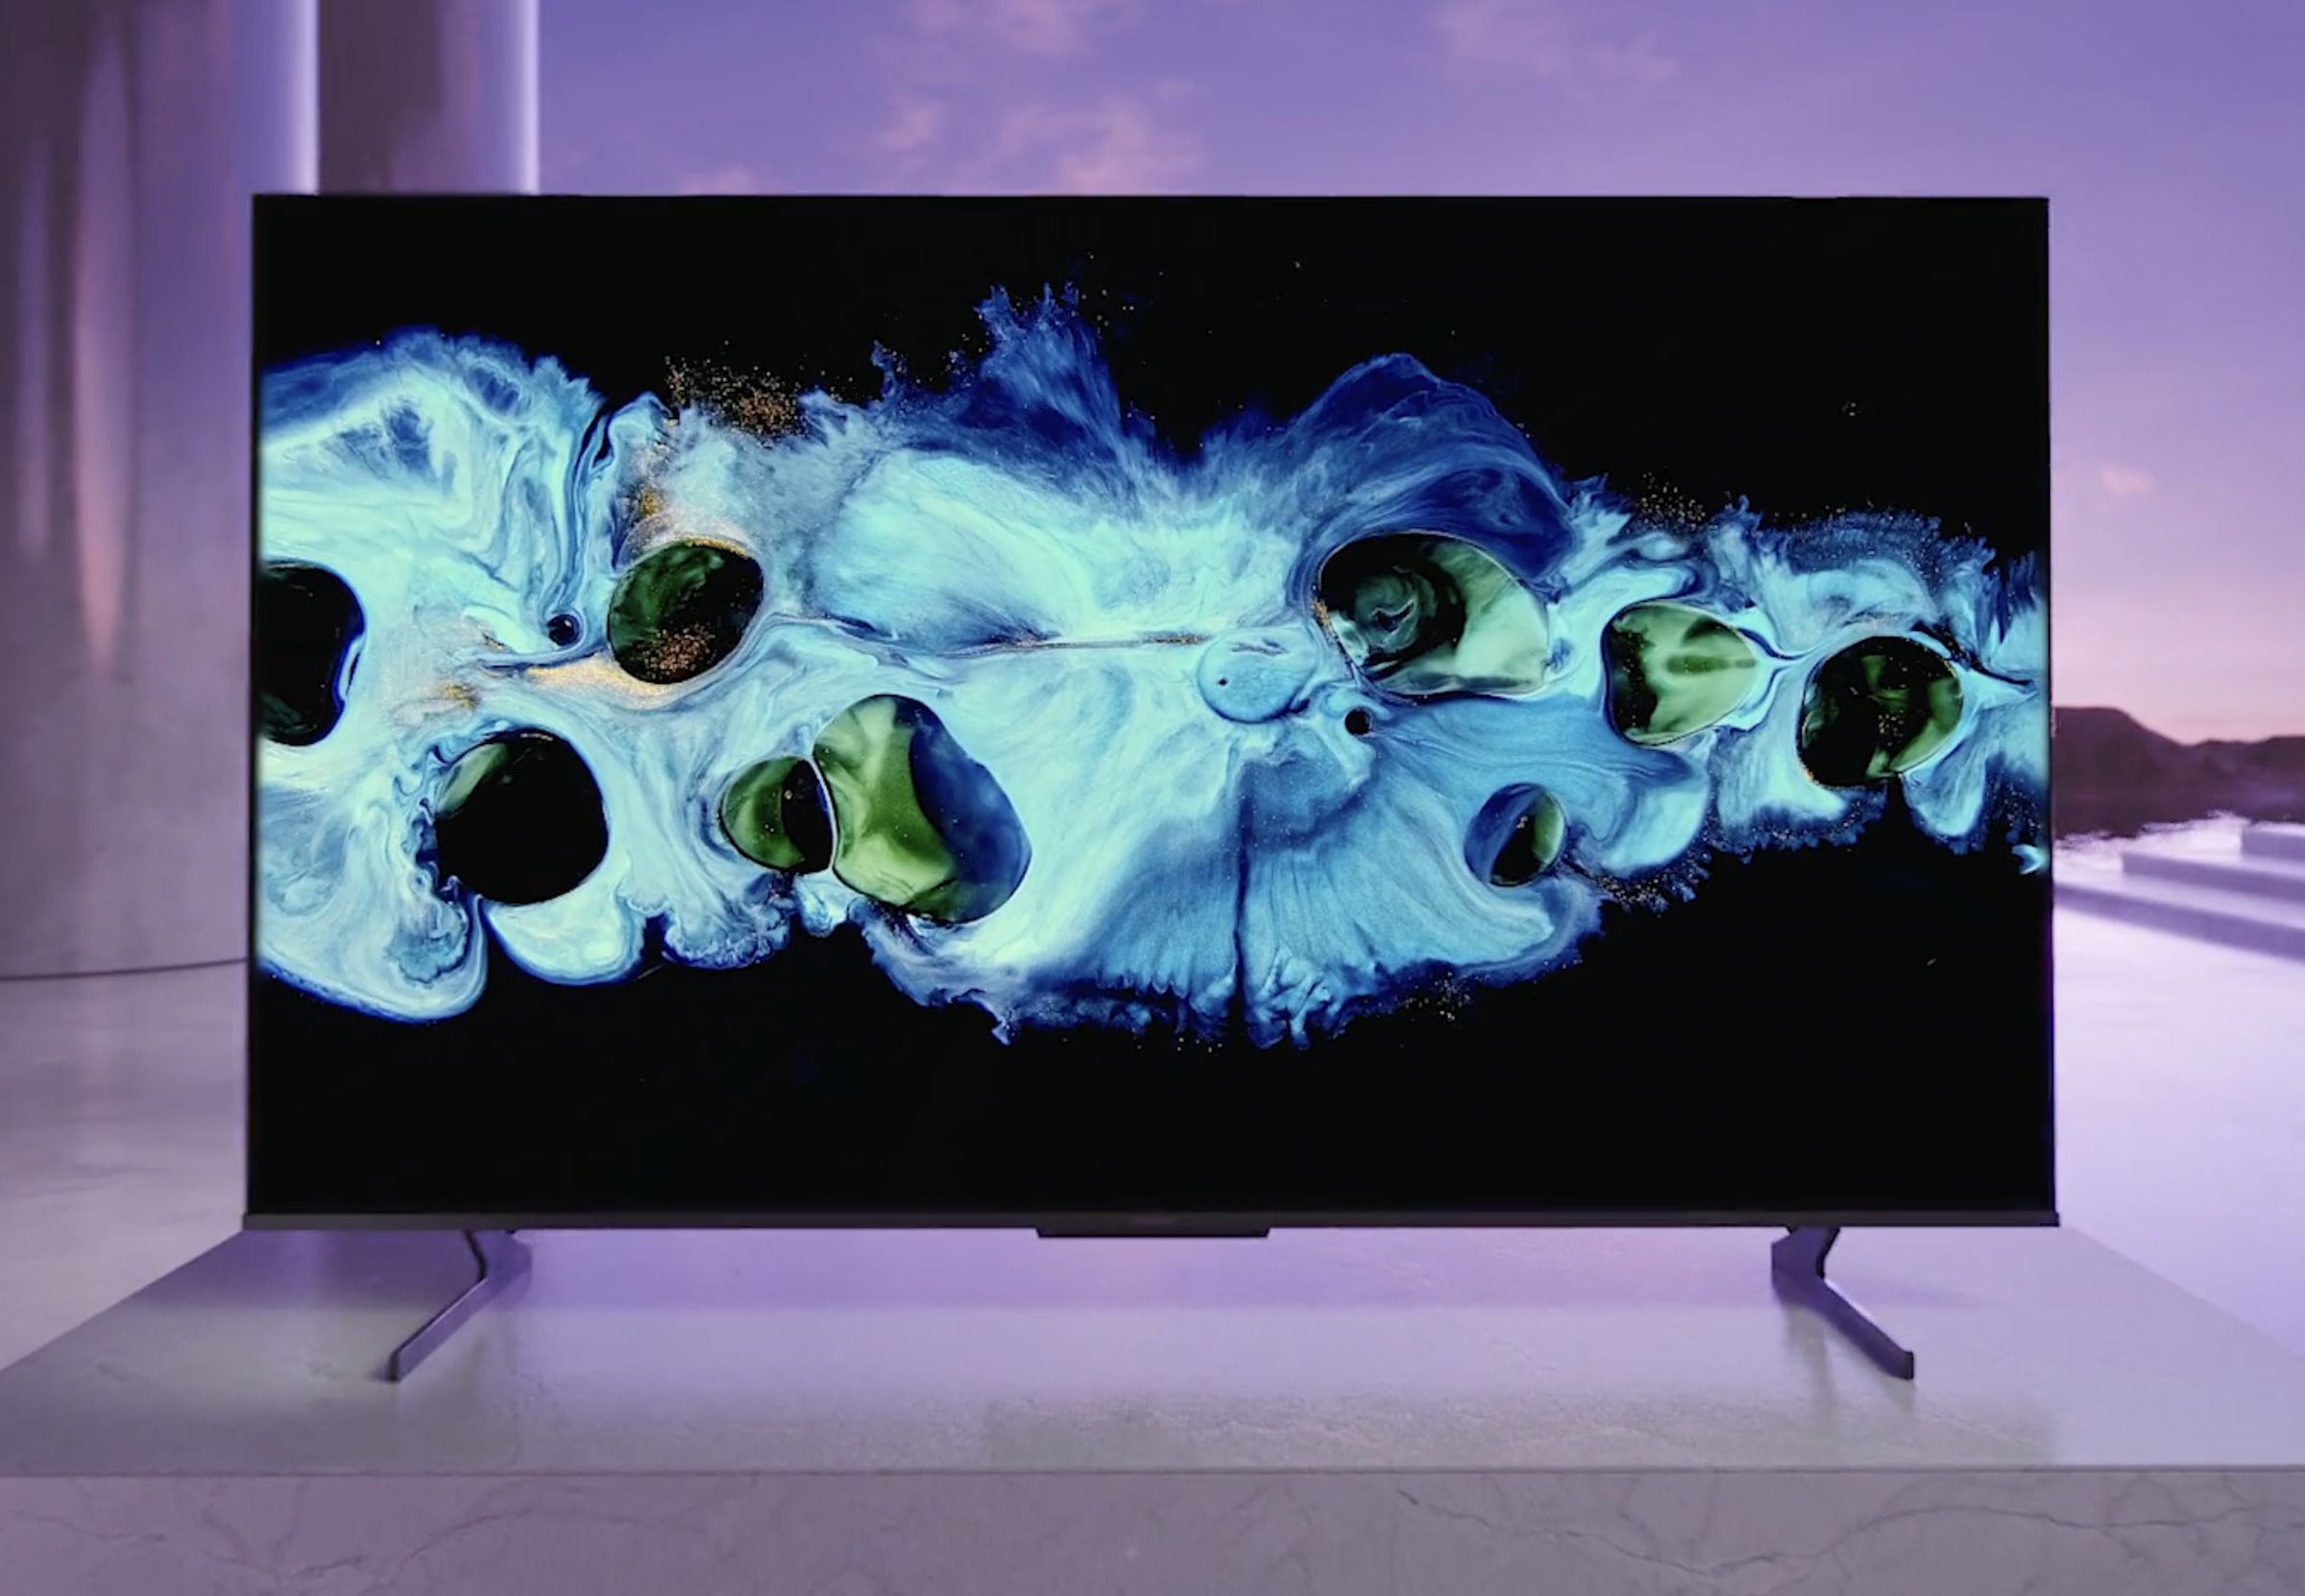 A press image / render of Hisense’s U8H with a colorful graphic displayed on its screen.